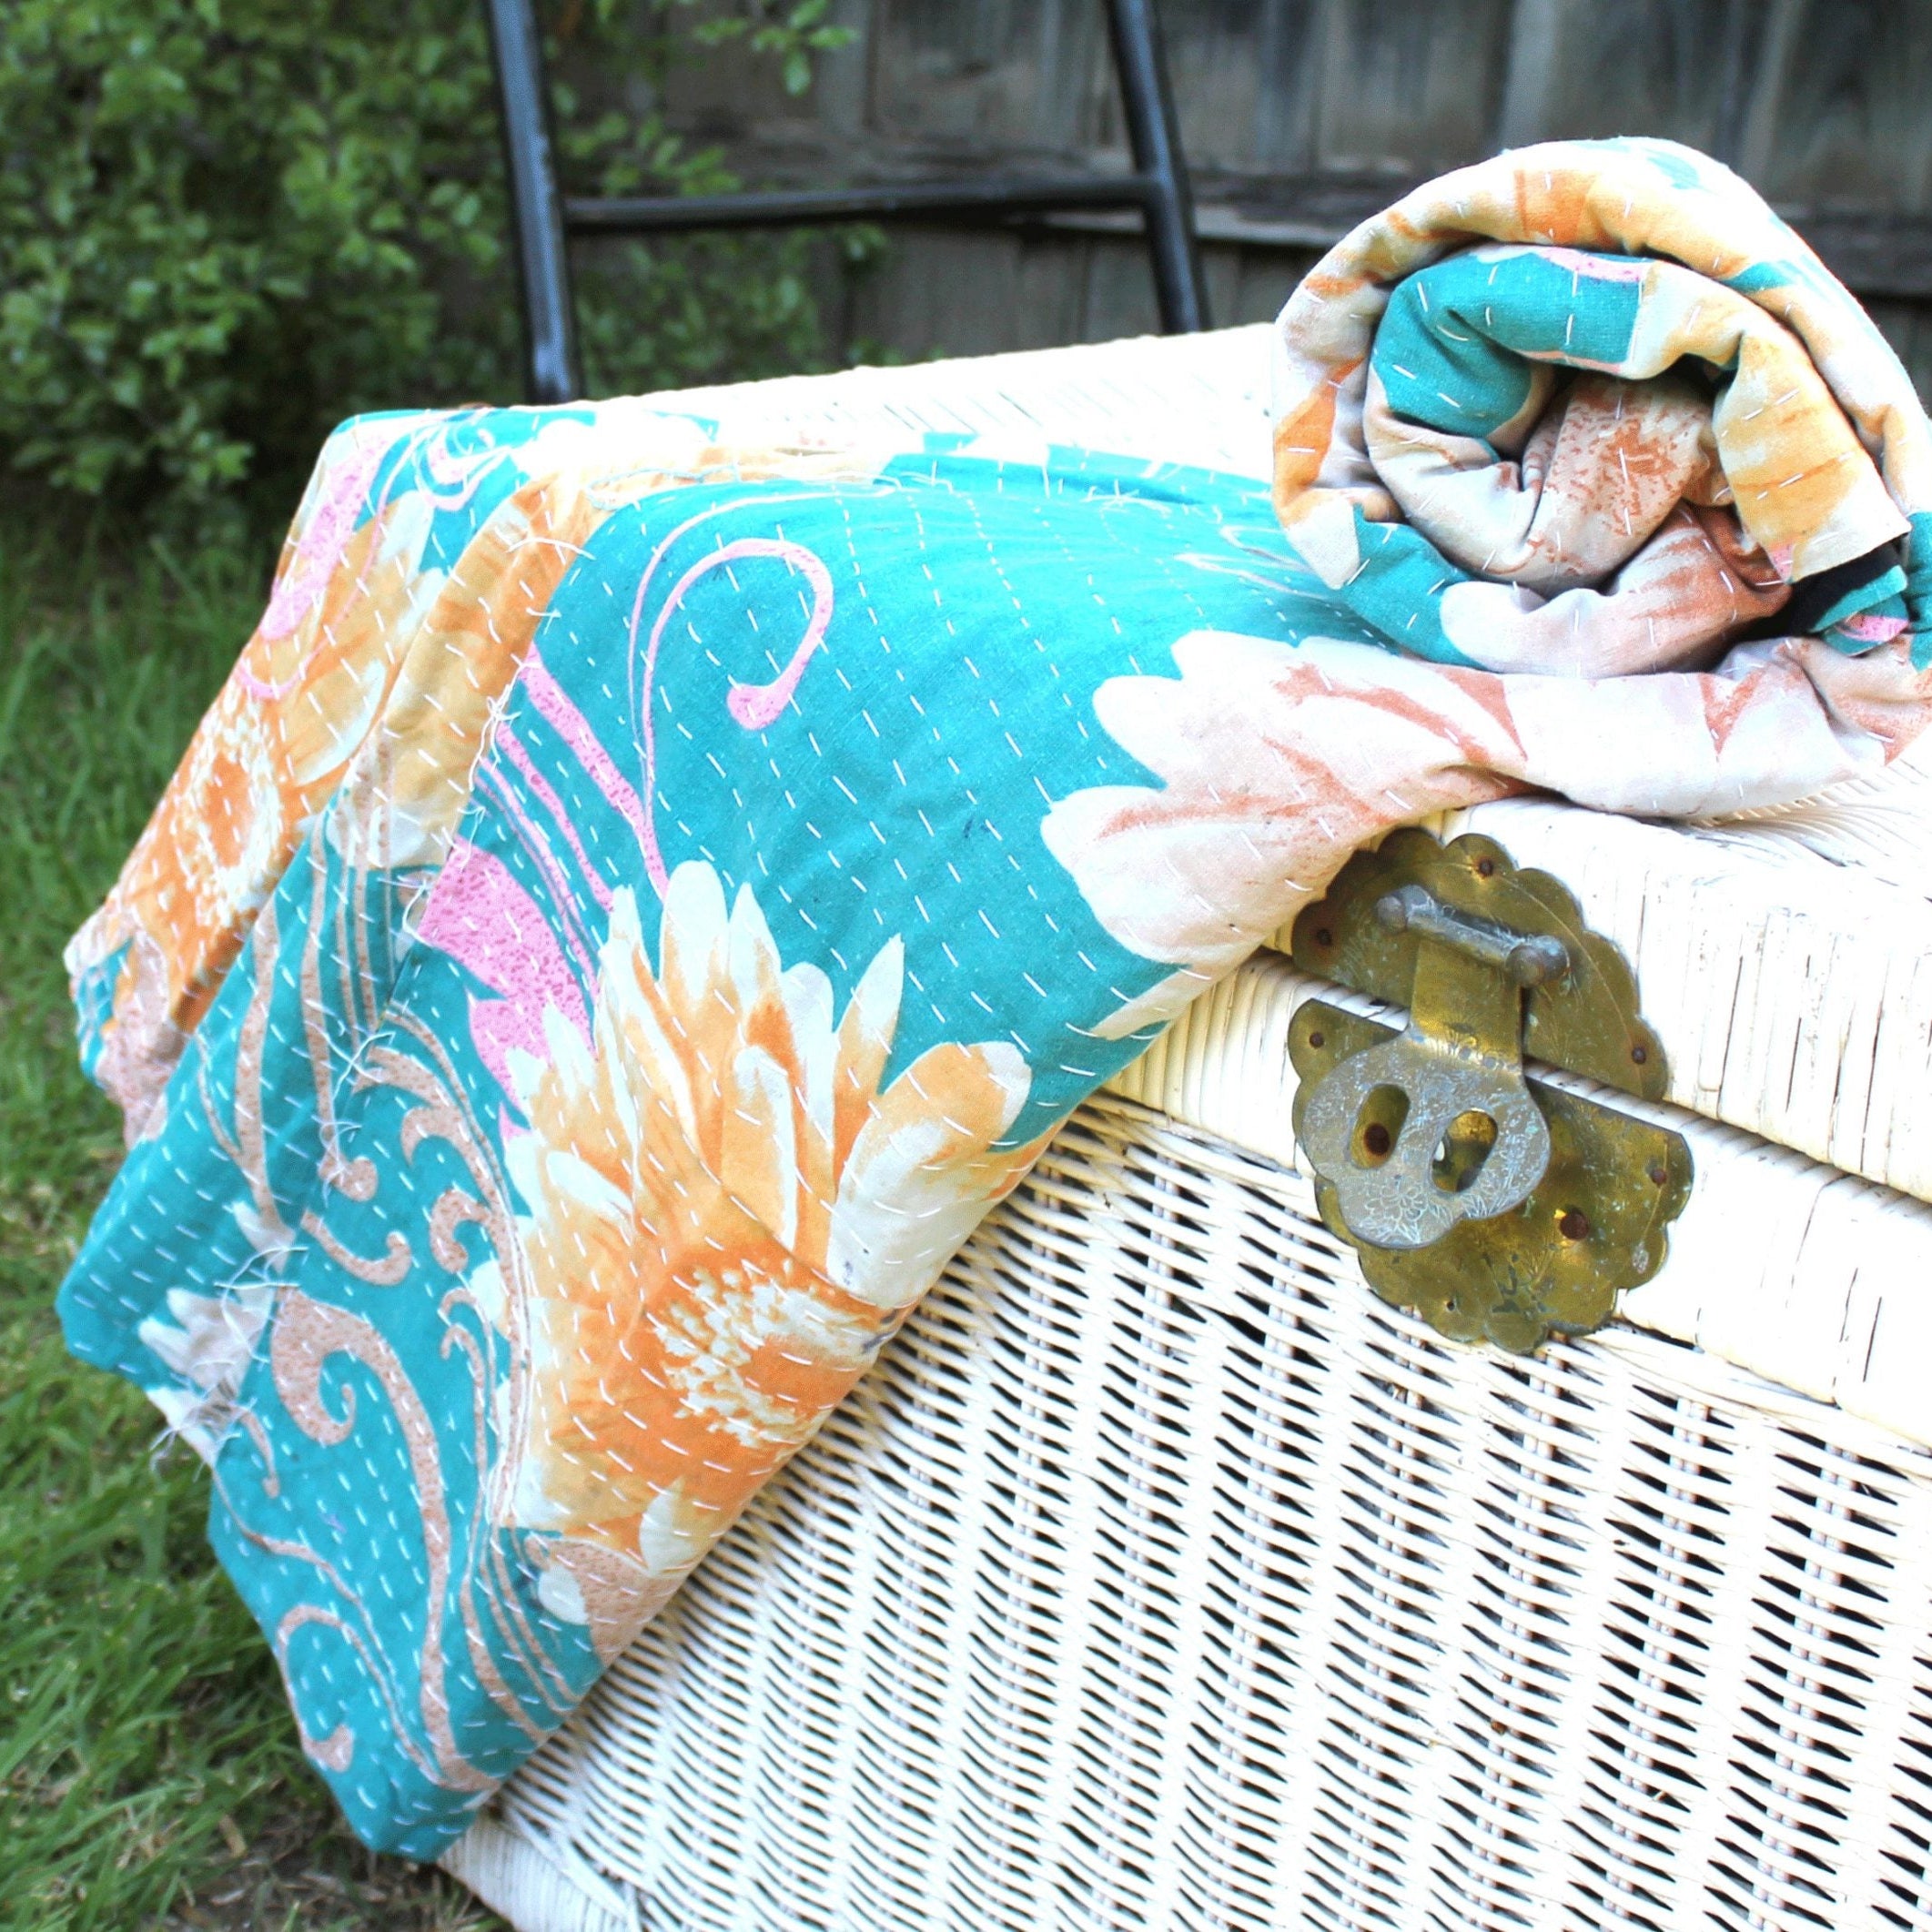 Vintage Hand Made Indian Kantha Bed Spread Blanket Throw Boho Home Decor Linen Connections Patchwork Boho throw kantha quilt baby blanket